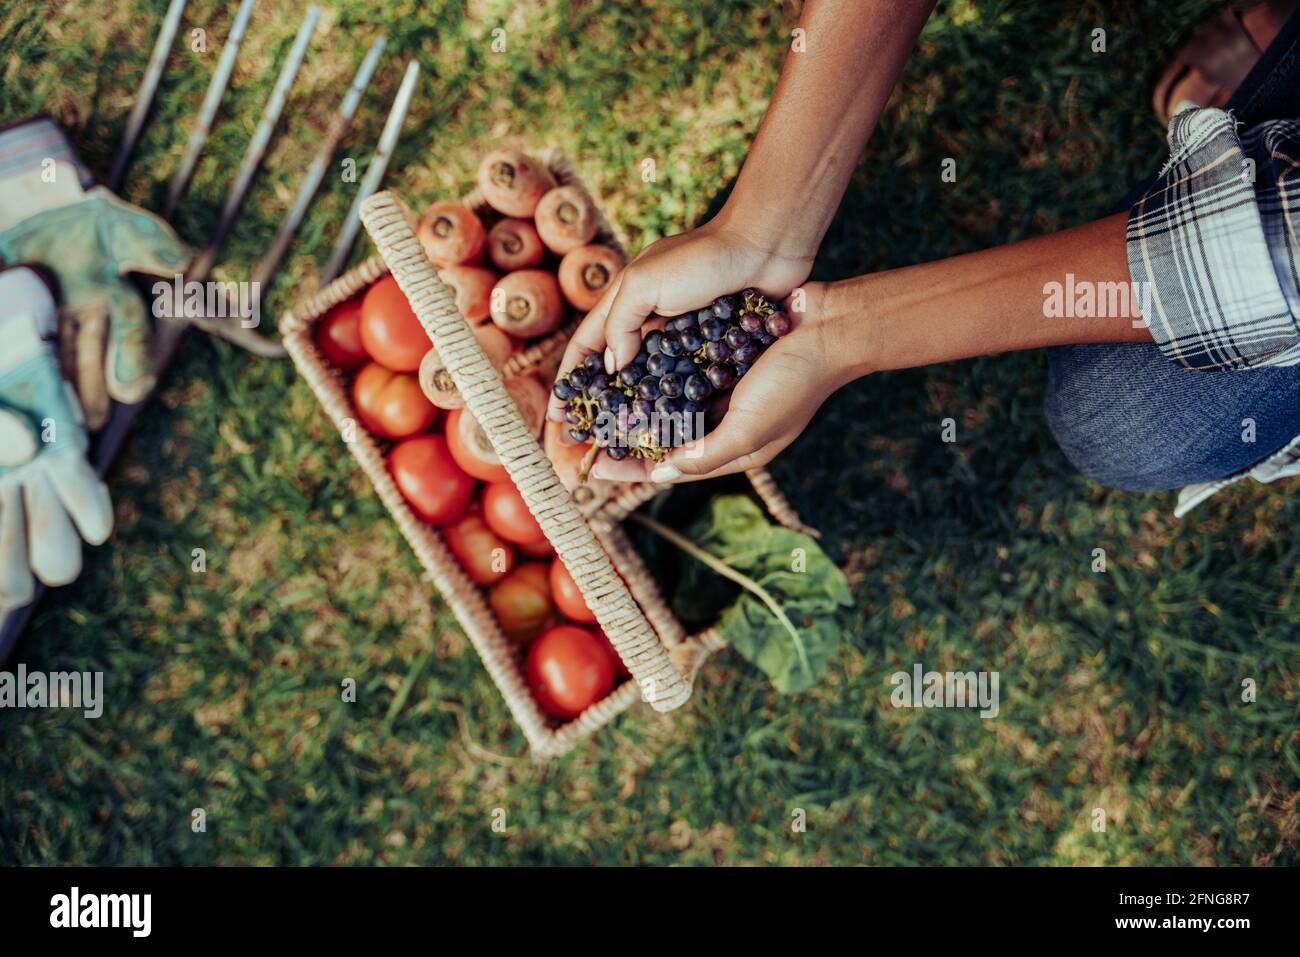 Mixed race female crouching down holding bunch of grapes in cupped hands above basket of fresh vegetables Stock Photo